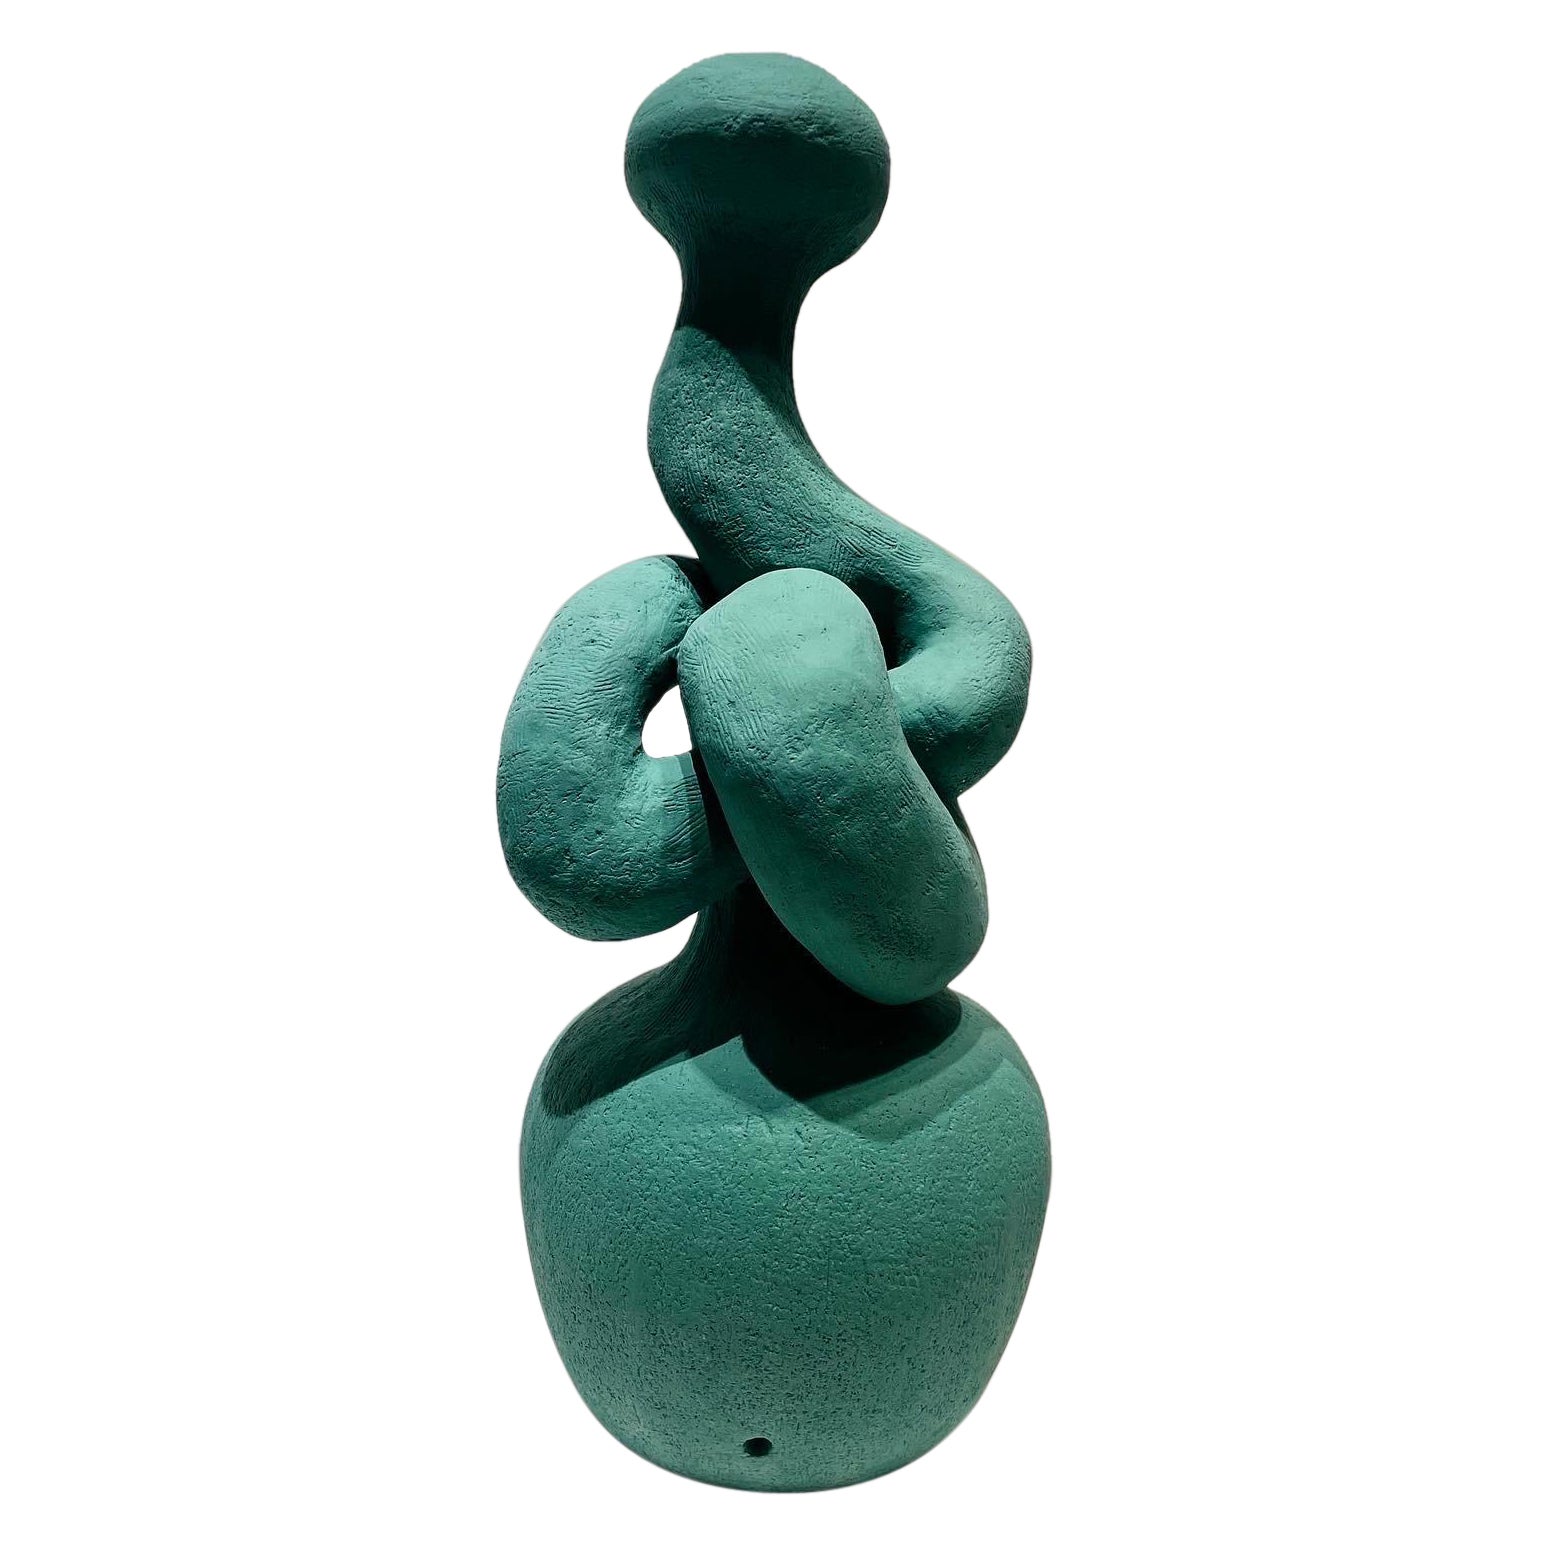 Knot Table Sculpture or Lamp, in Wintergreen, Handmade by Artist Stef Duffy